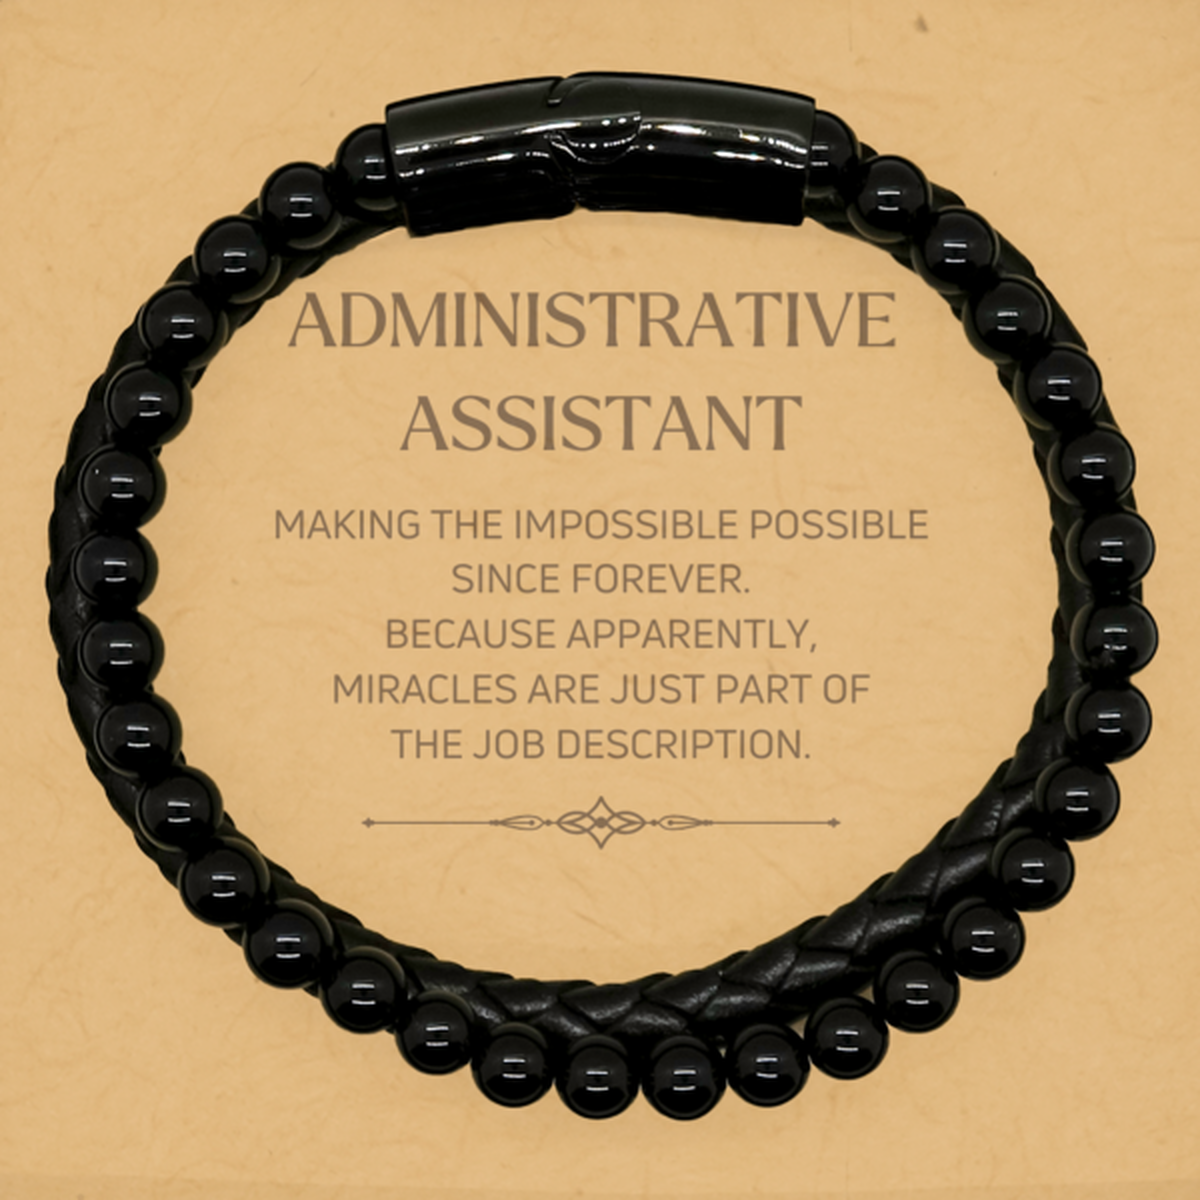 Funny Administrative Assistant Gifts, Miracles are just part of the job description, Inspirational Birthday Stone Leather Bracelets For Administrative Assistant, Men, Women, Coworkers, Friends, Boss